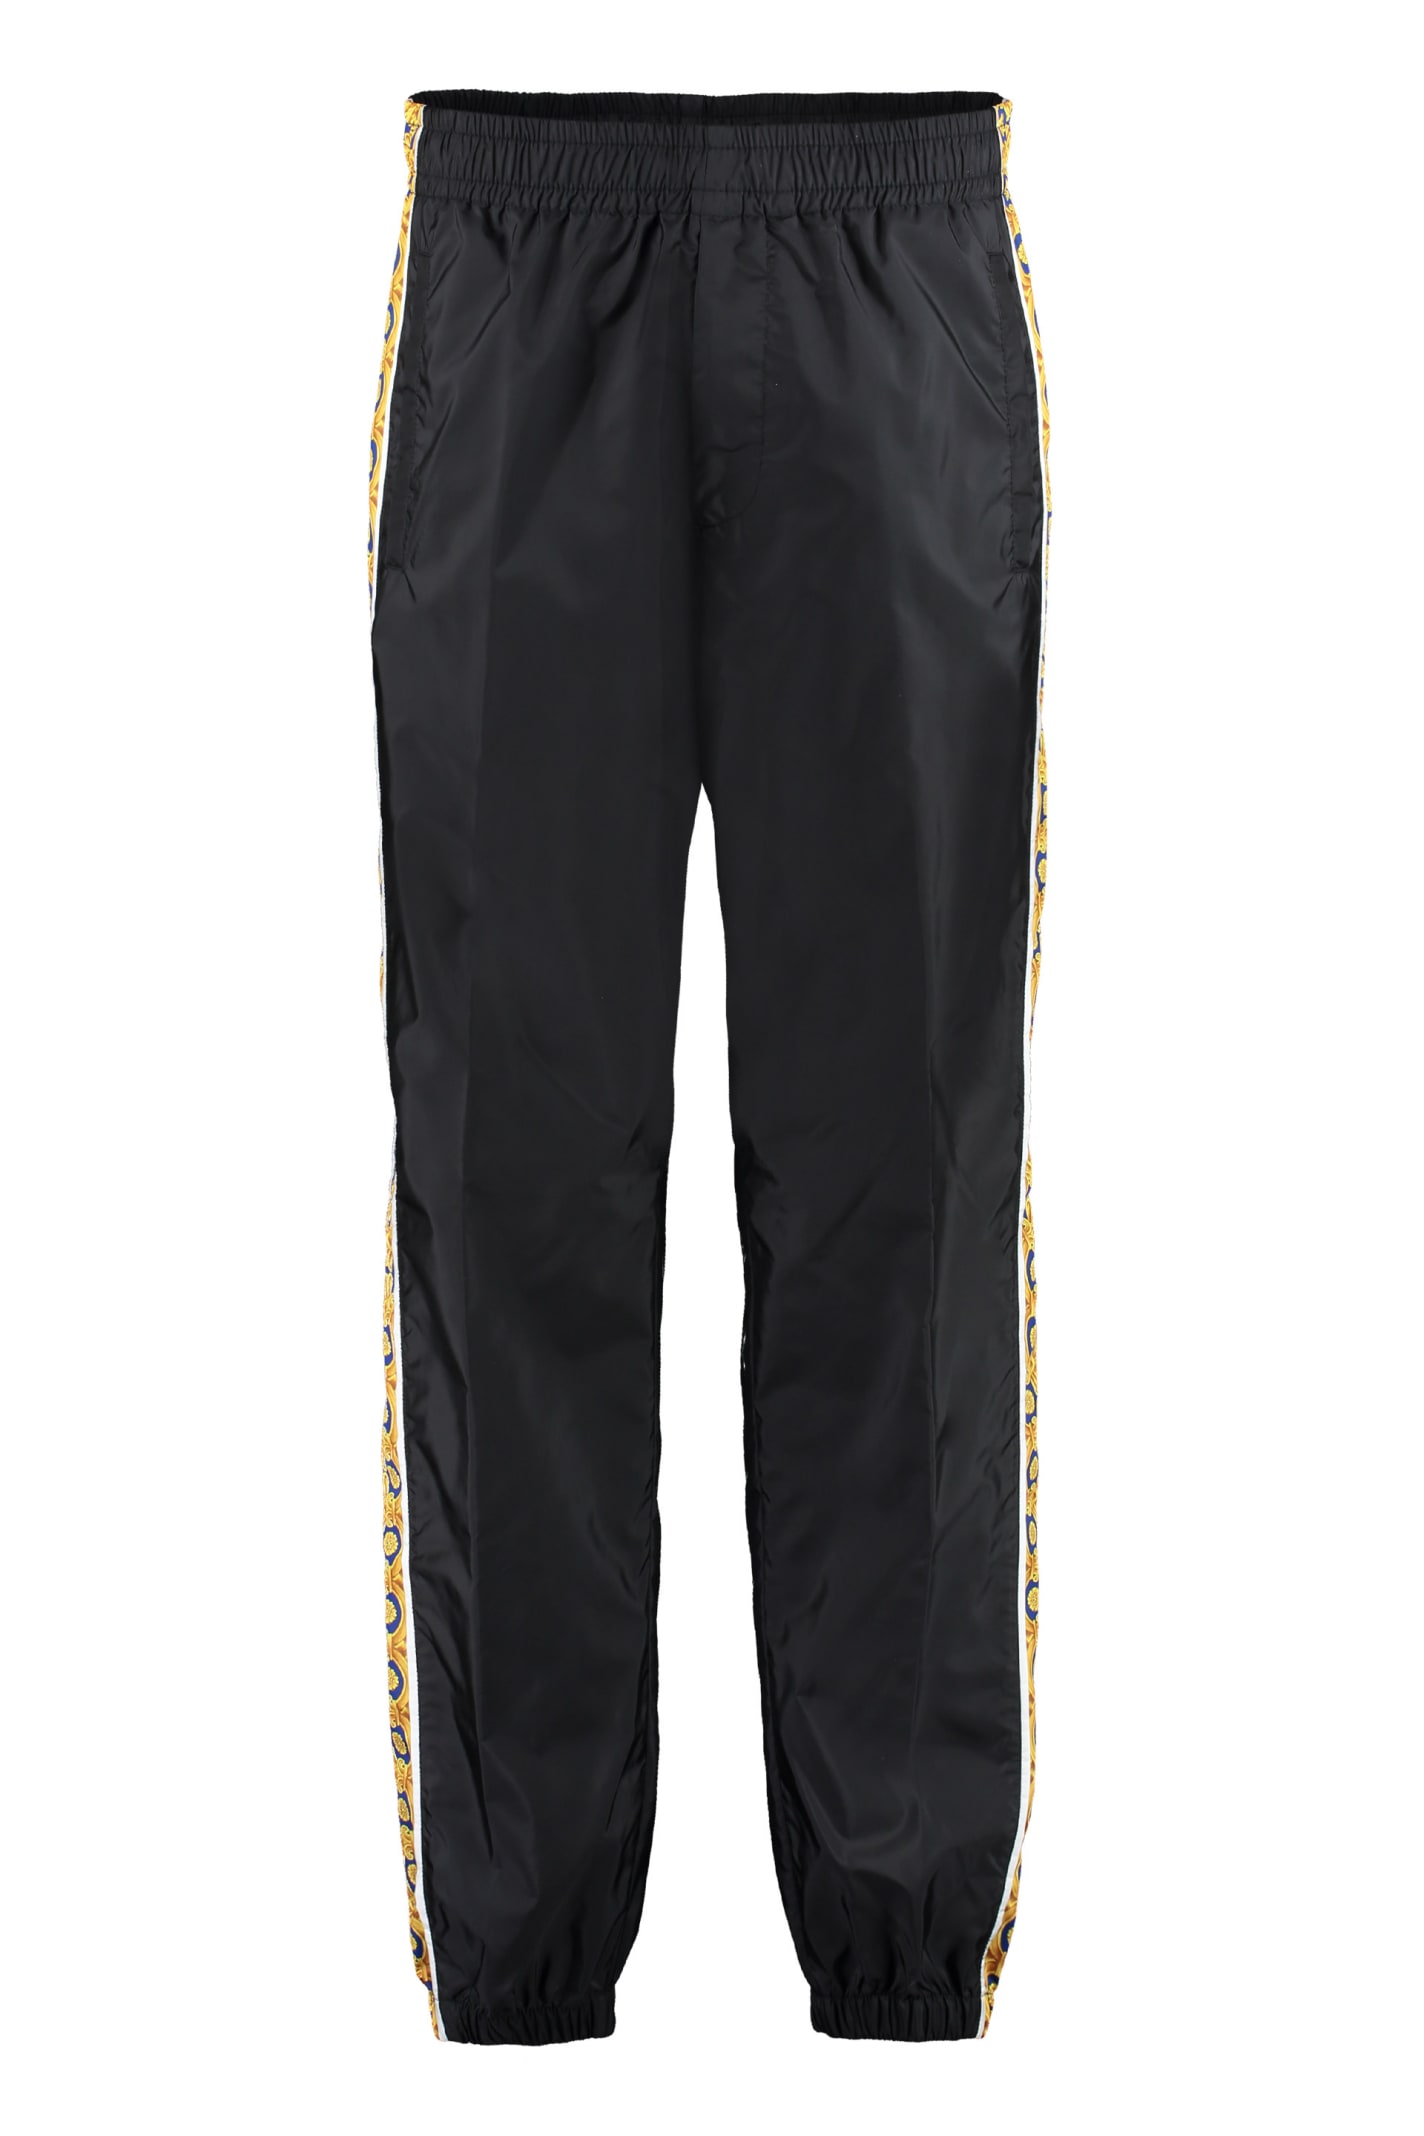 VERSACE TRACK-PANTS WITH CONTRASTING SIDE STRIPES